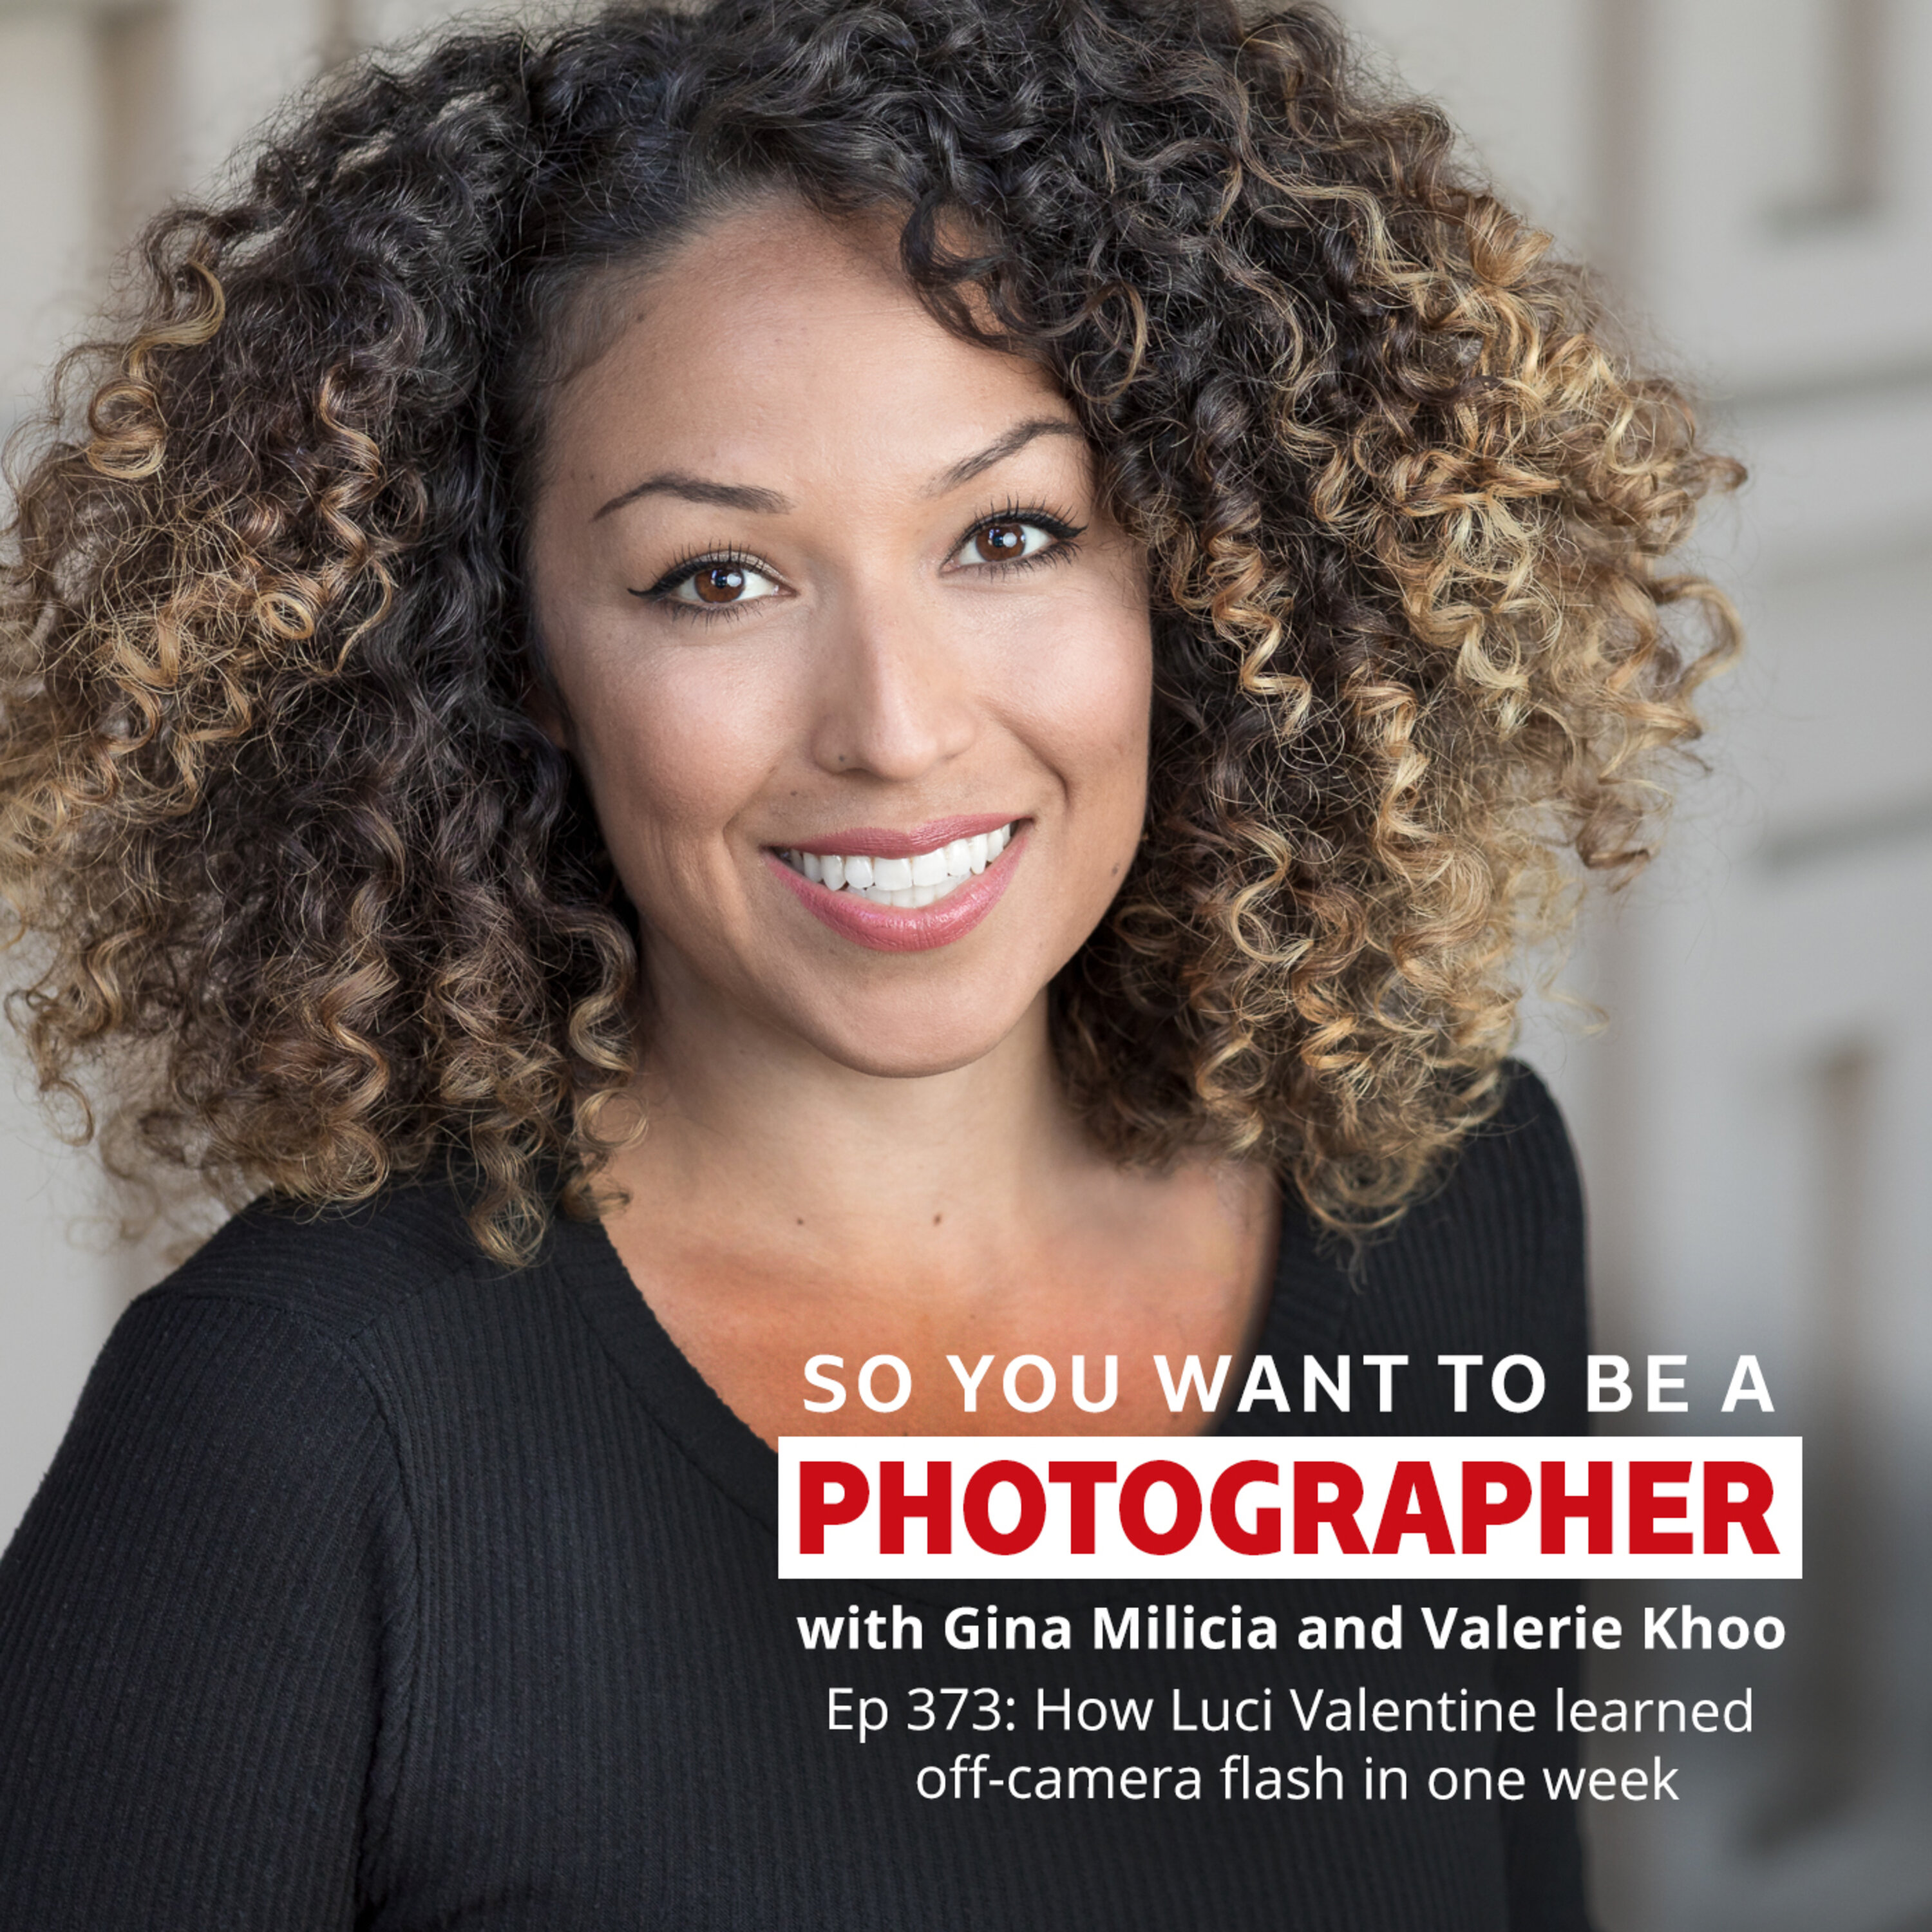 PHOTO 373: How Luci Valentine learned off-camera flash in one week